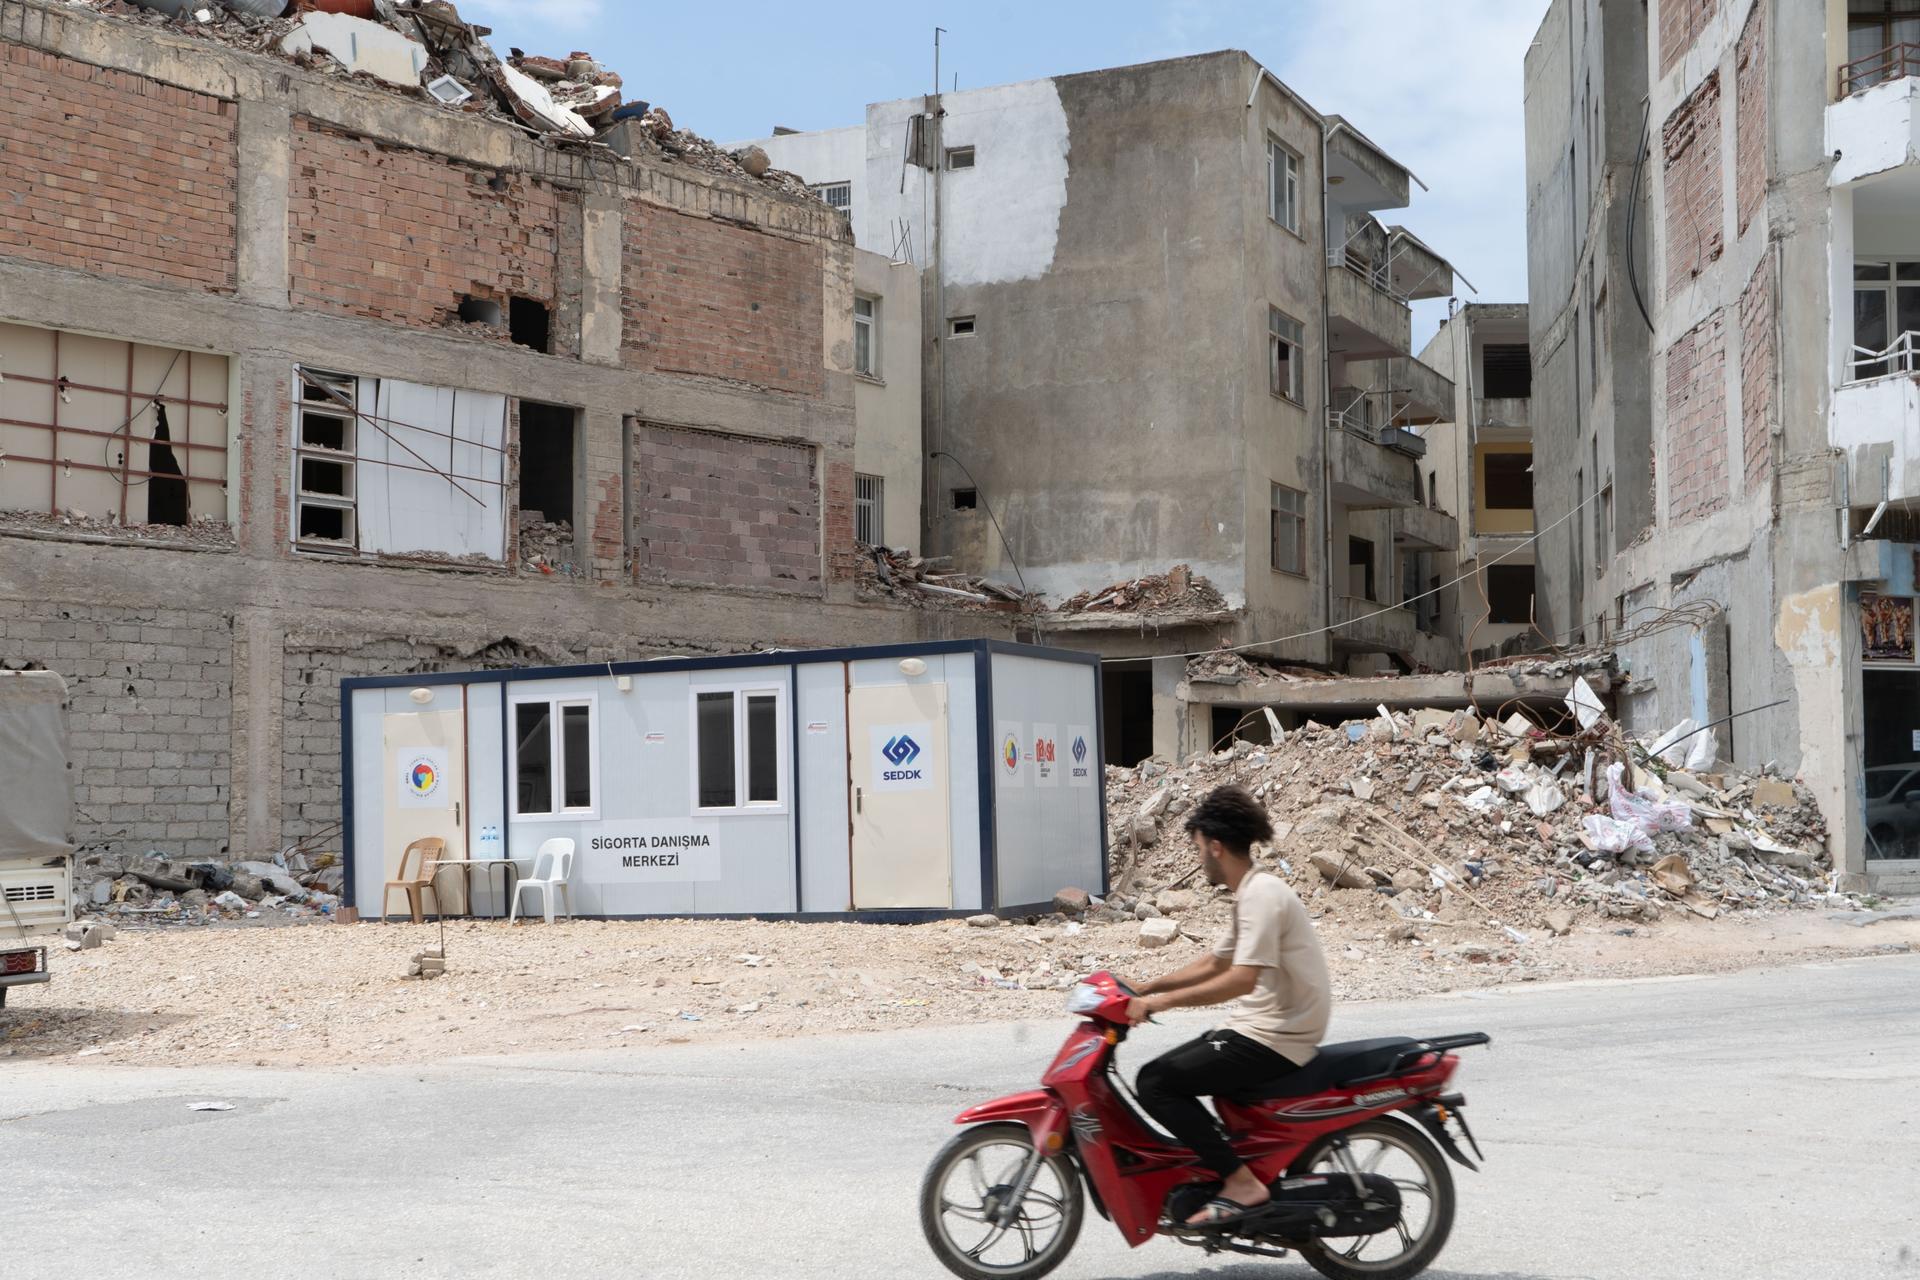 A motorcyclist rides past a demolished building in the beach town of Samandağ. A converted shipping container serves as an insurance office.